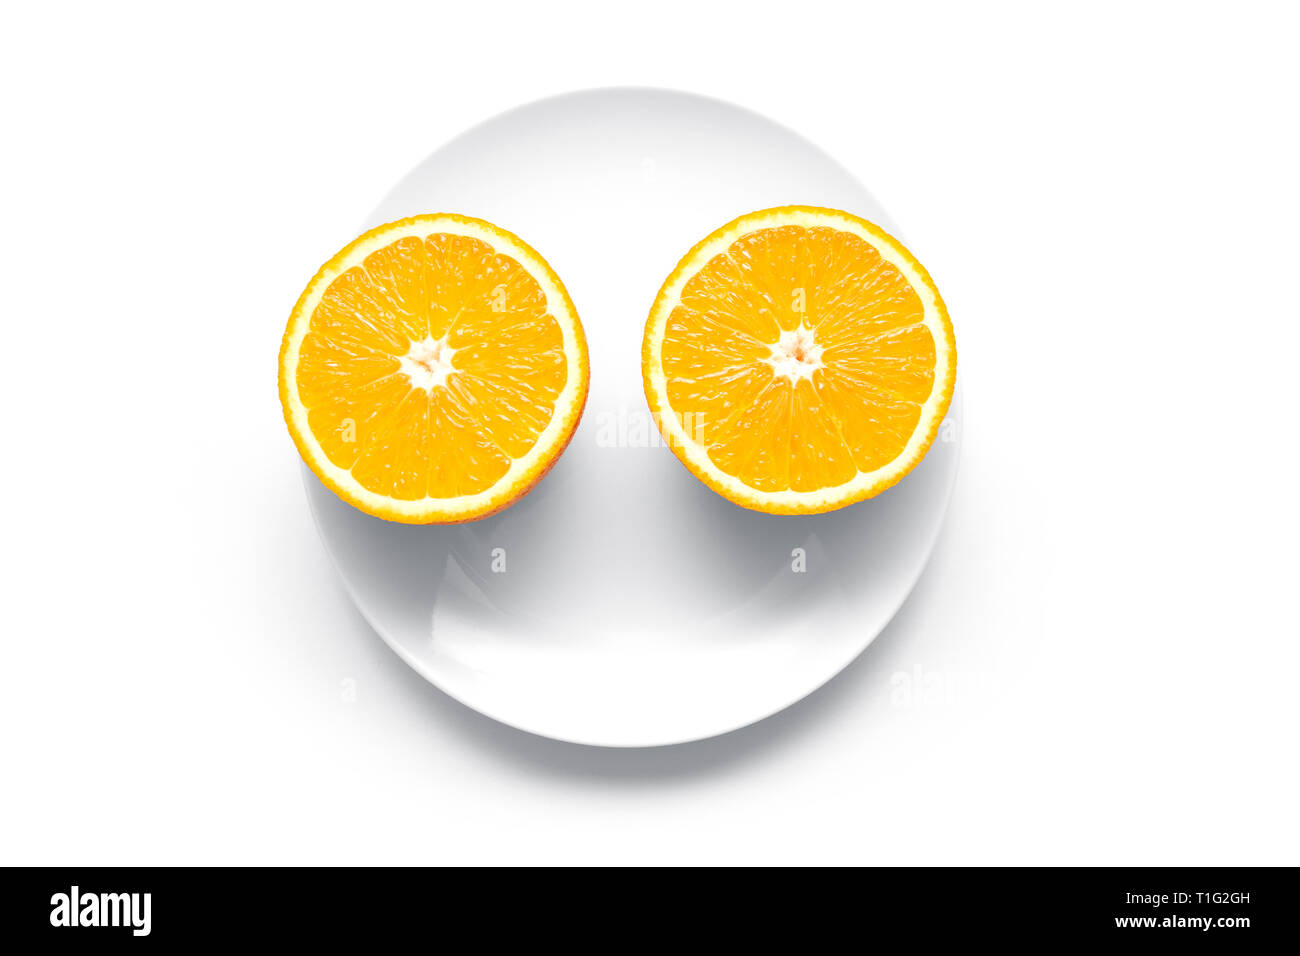 Two ripe orange parts on a round plate Stock Photo